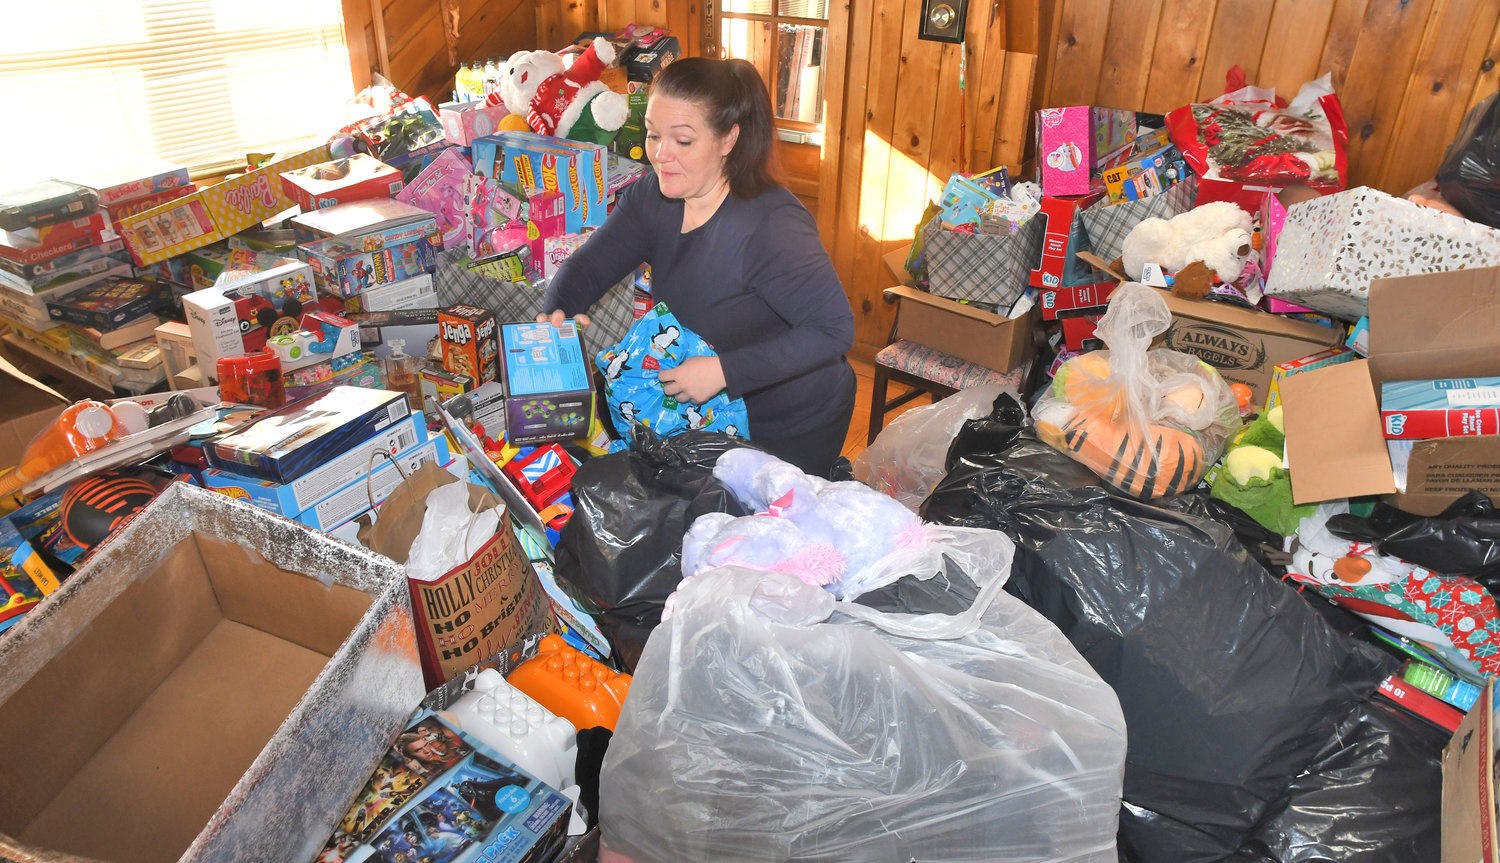 WRAPPING UP — Rescue Mission administrative assistant Destiny Branfalt stacks toys that will benefit needy families, including some 970 children, on Christmas day. The mission is still accepting toy and food donations to help brighten the holidays. See story, page 2.